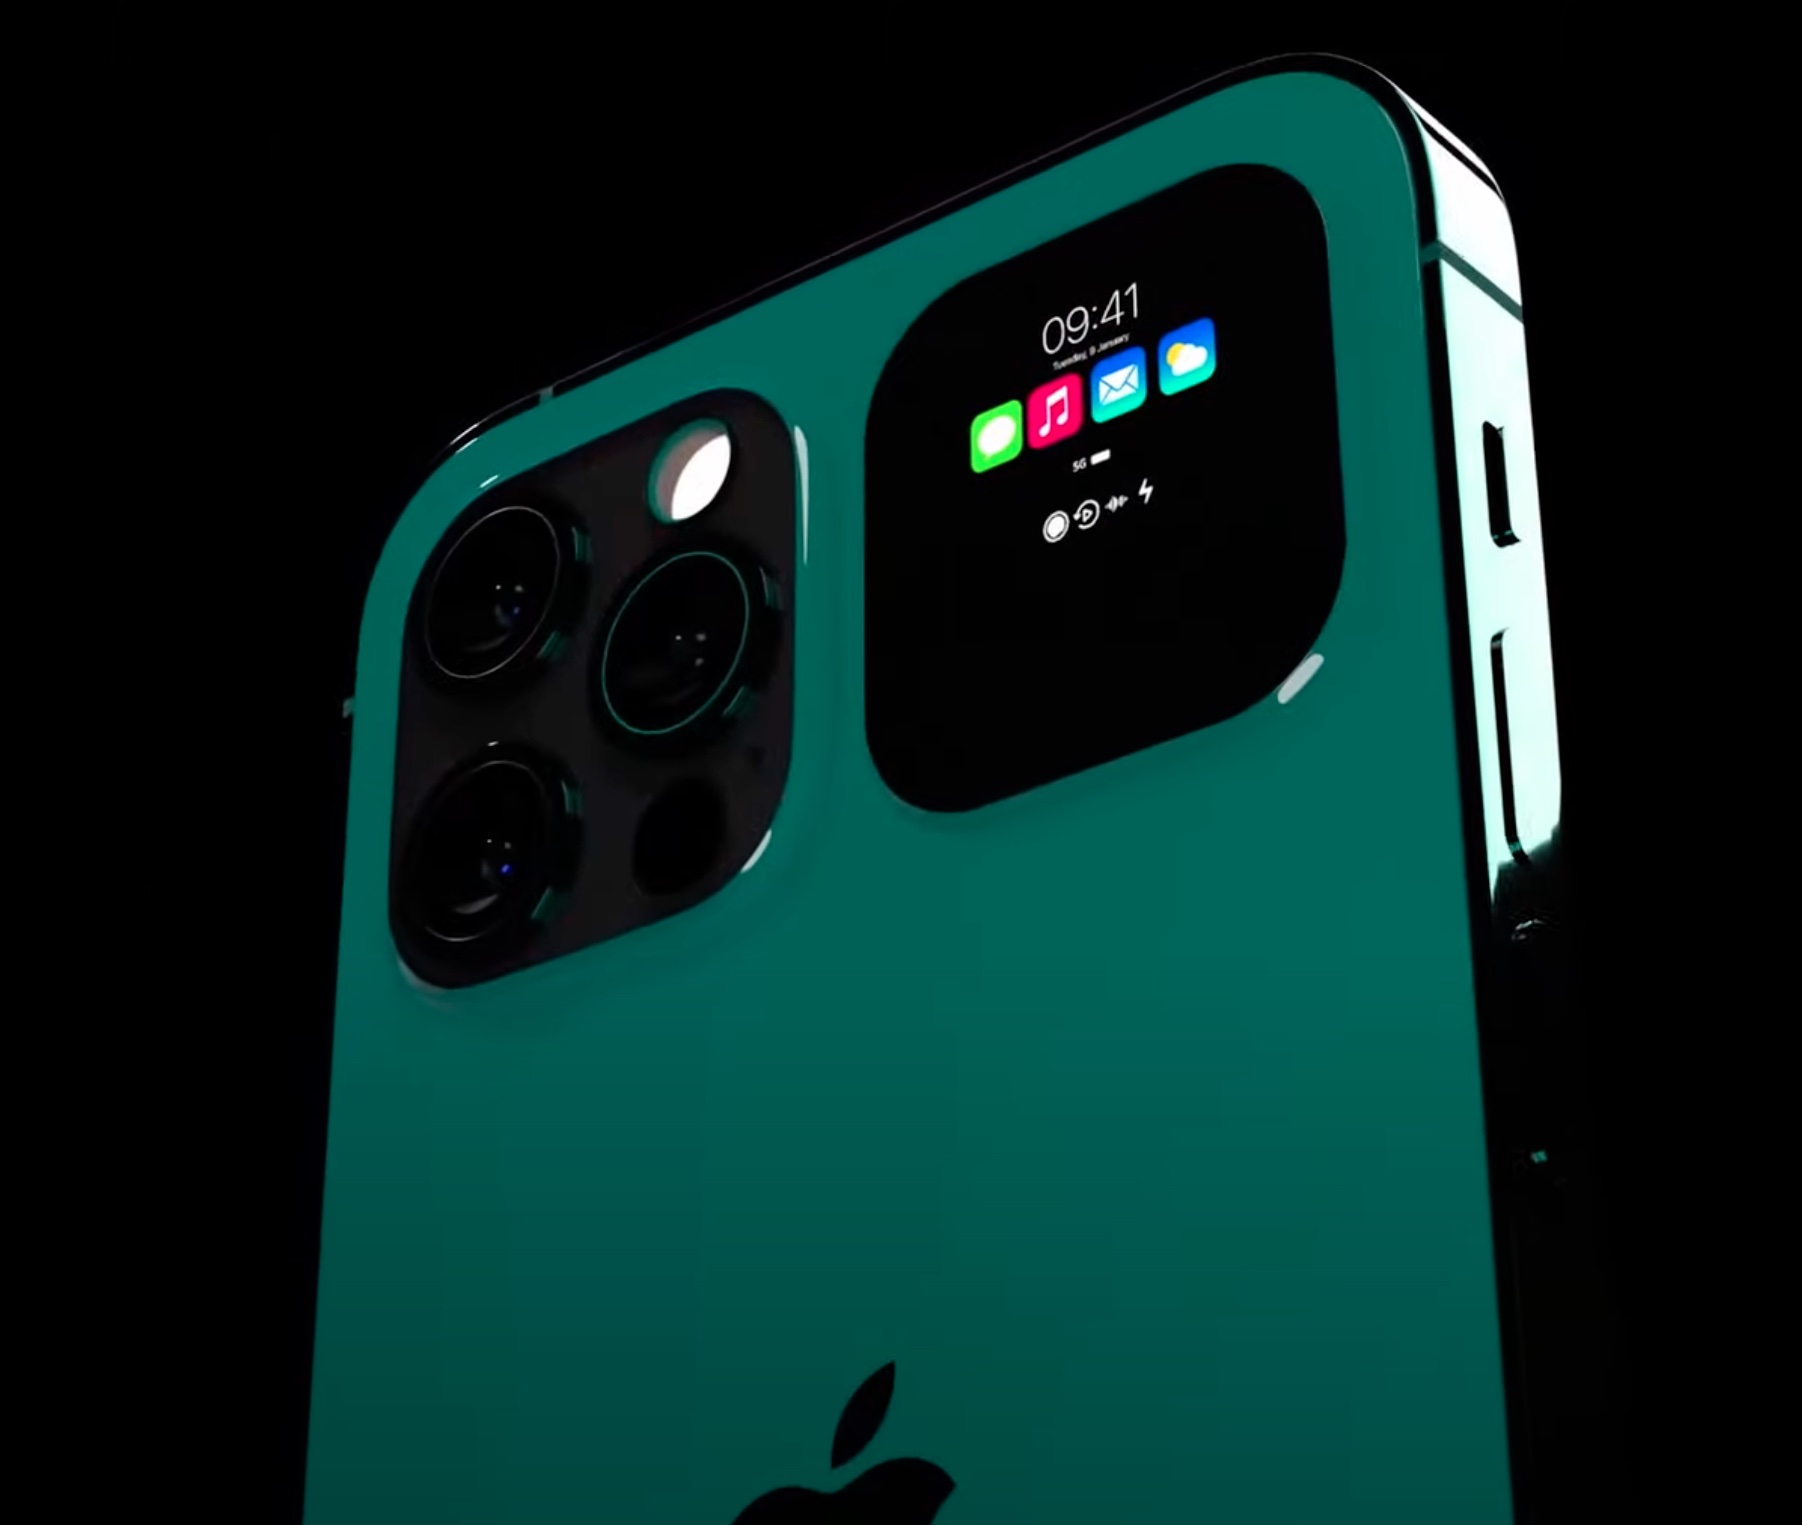 Introducing iPhone 16 Ultra  Apple - (Concept Trailer) 